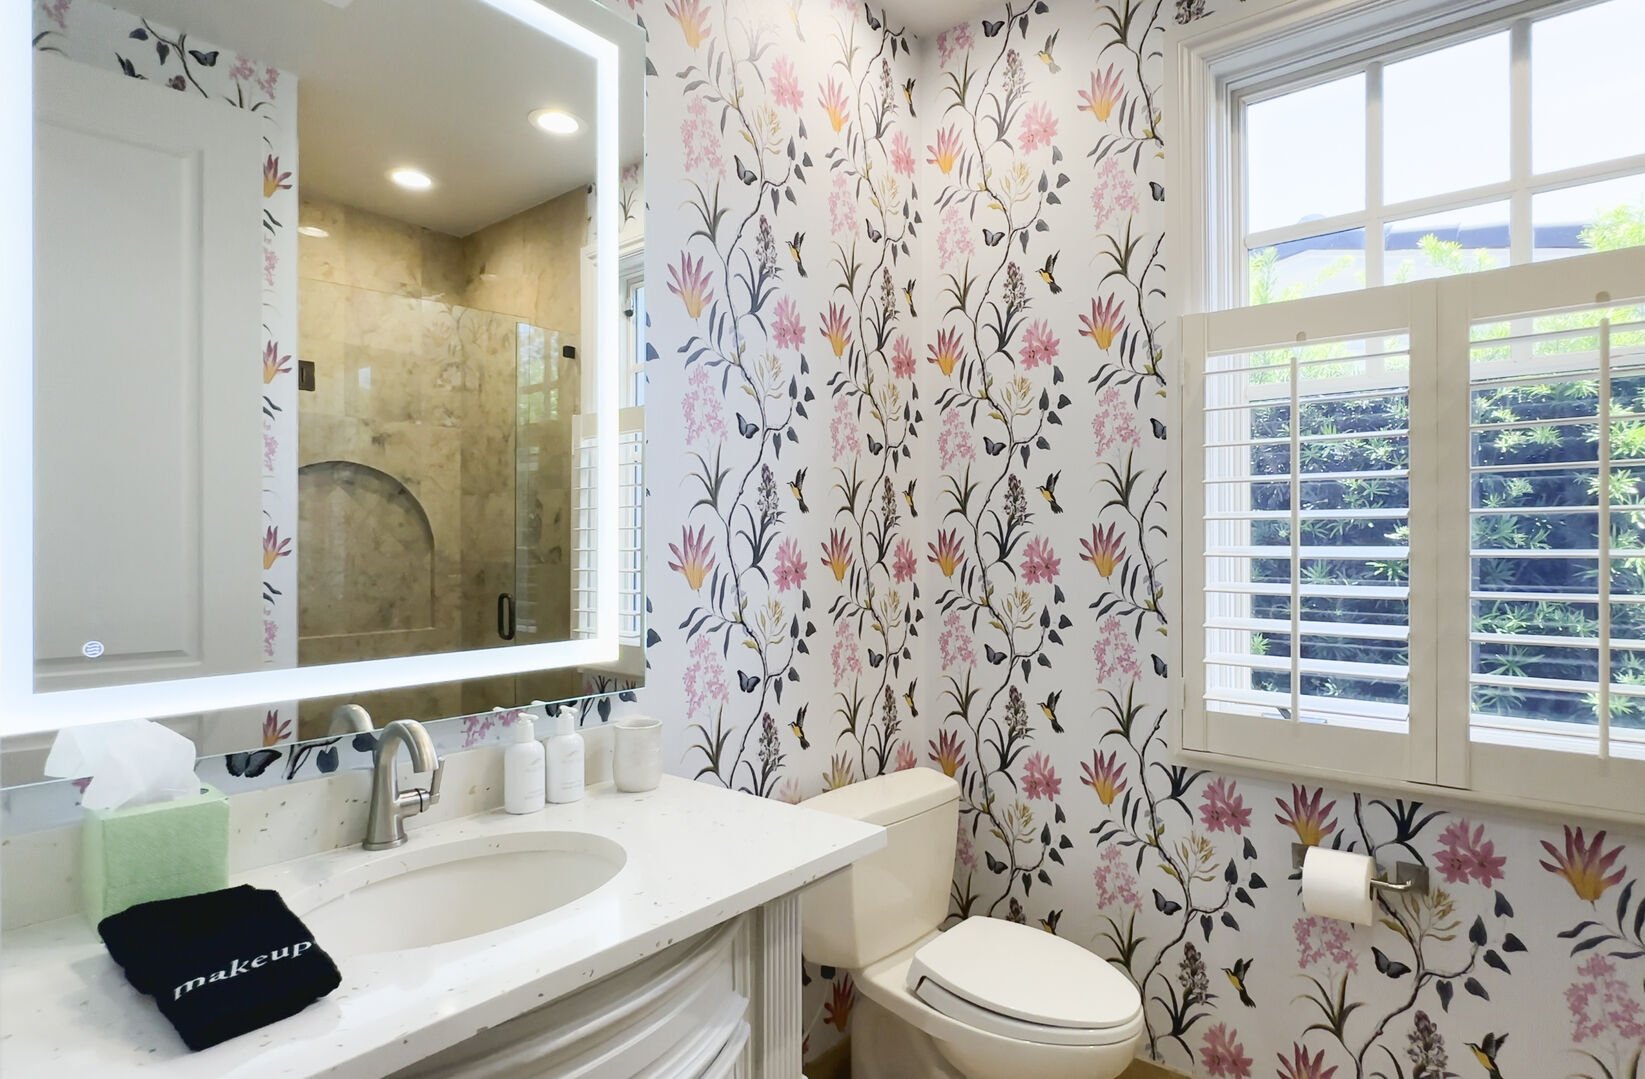 Downstairs bathroom features a walk-in shower and is conveniently located by the downstairs bedroom.